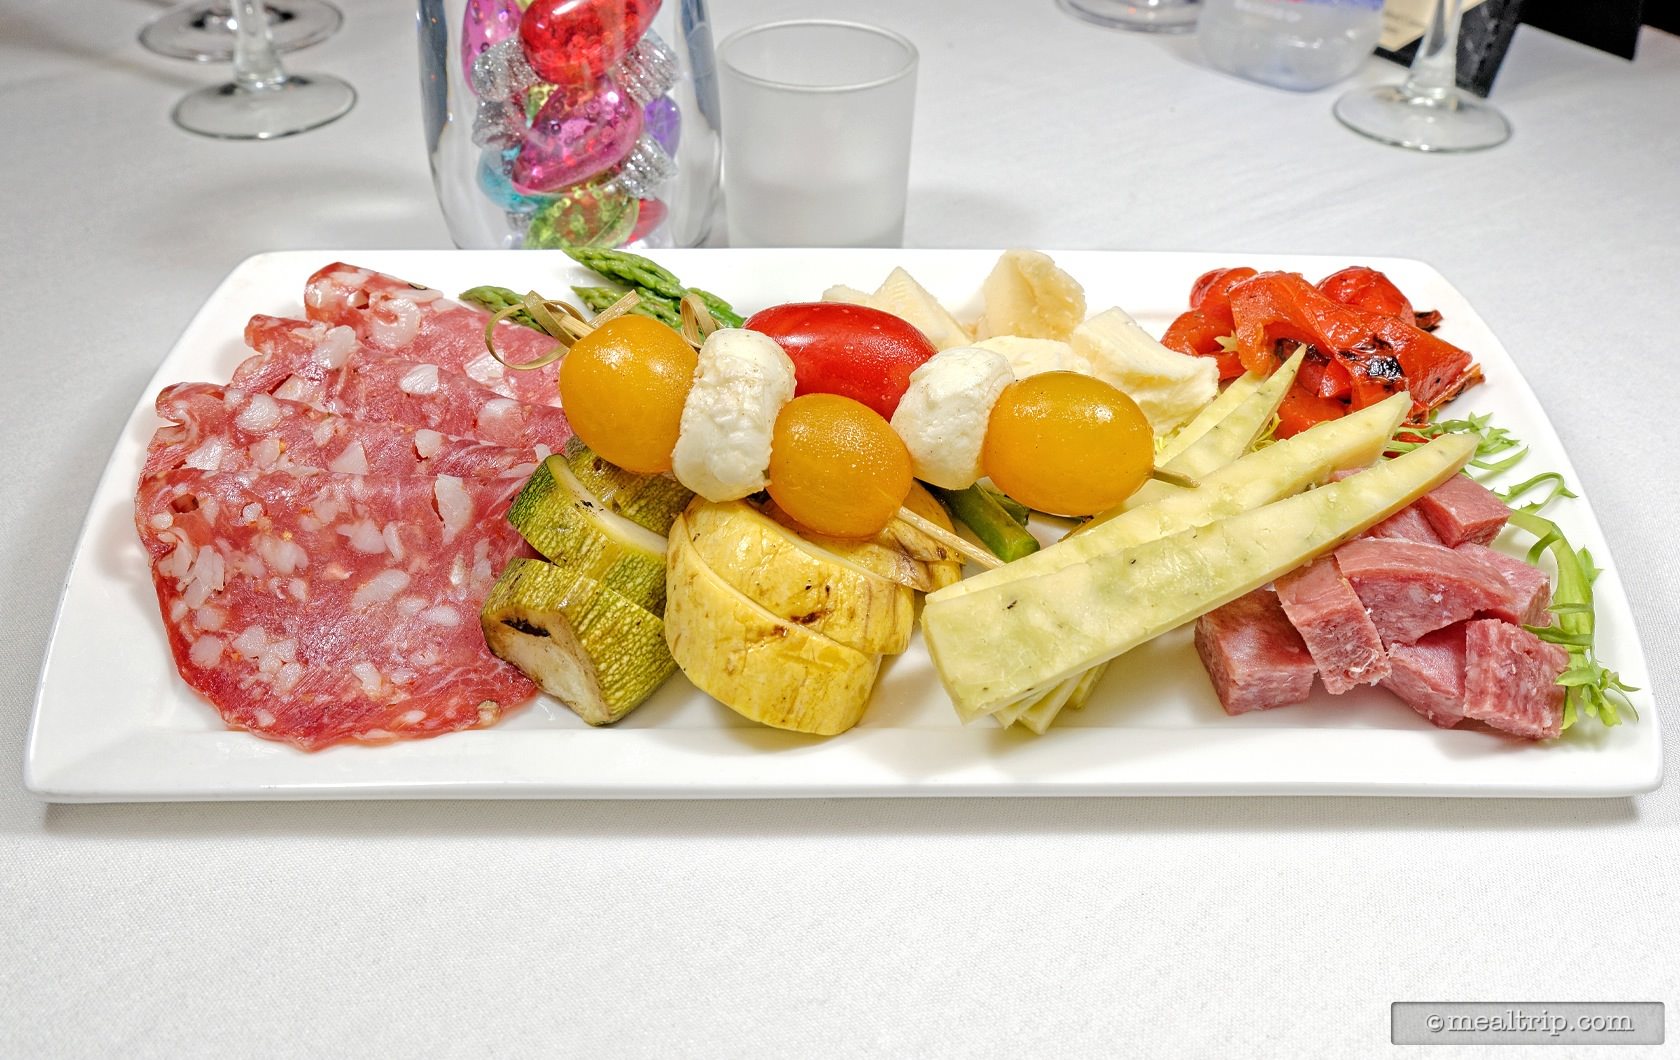 An Antipasto Plate from the VIP Menu